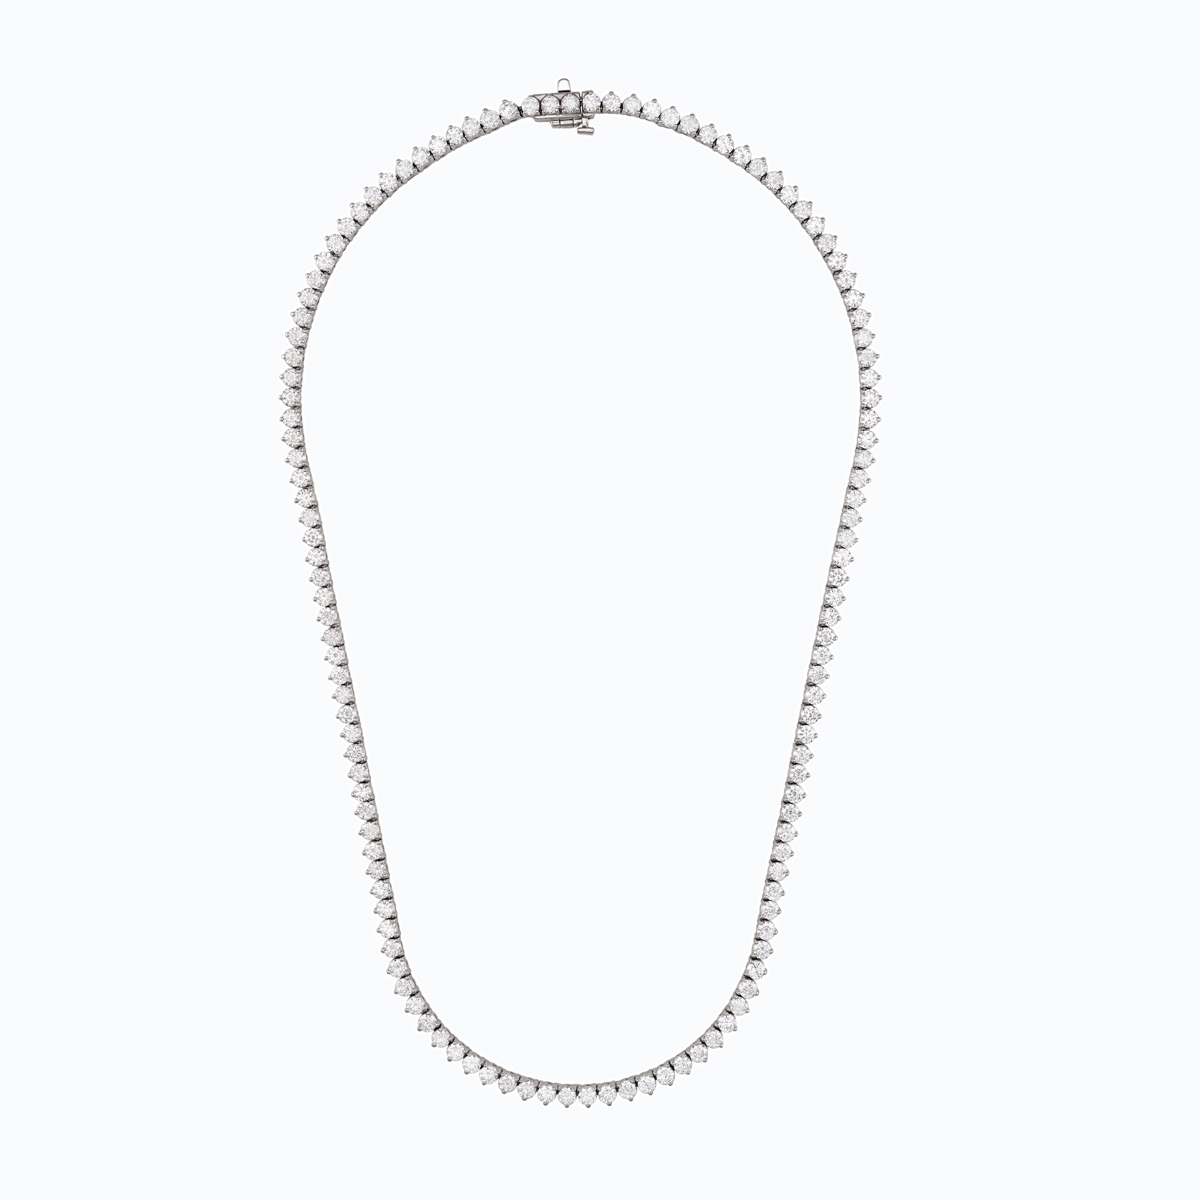 Three-Prong Diamond Riviere Necklace, 13.5 carts, 14k White Gold